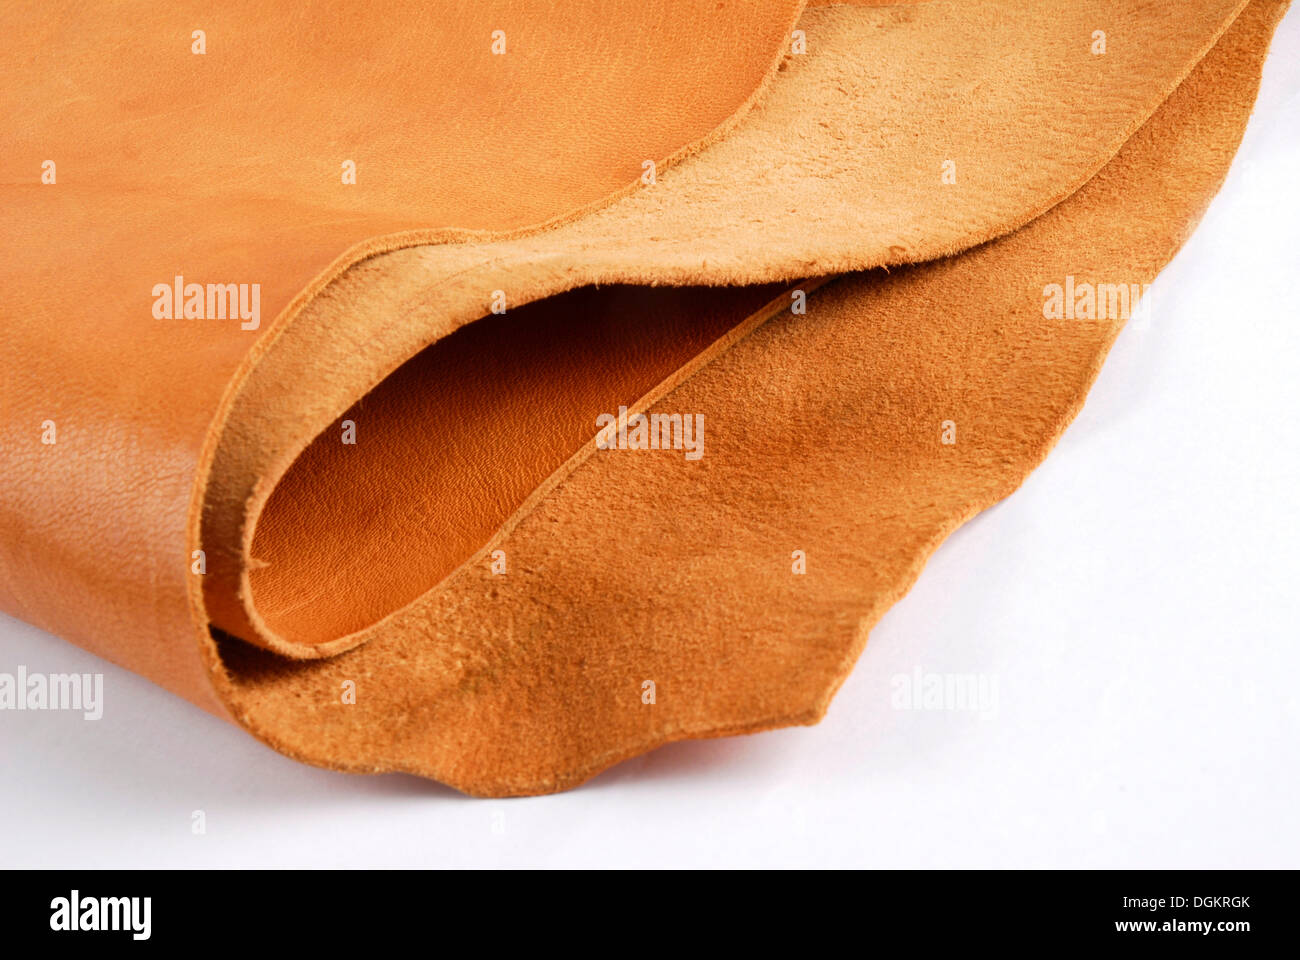 Tanned leather, leather tannery Stock Photo